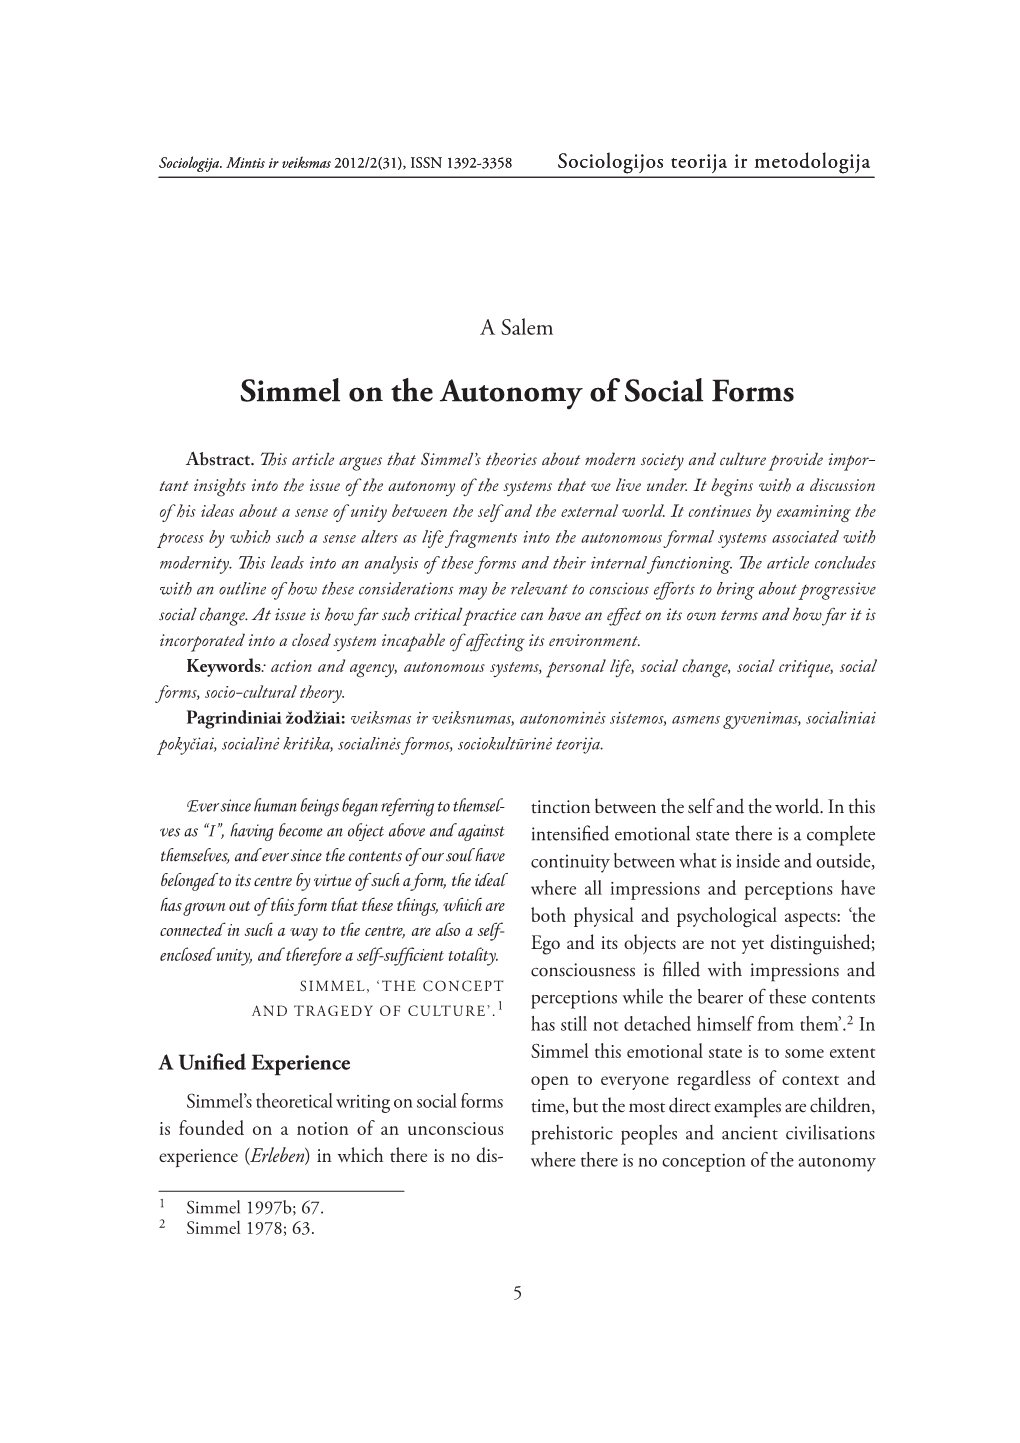 Simmel on the Autonomy of Social Forms